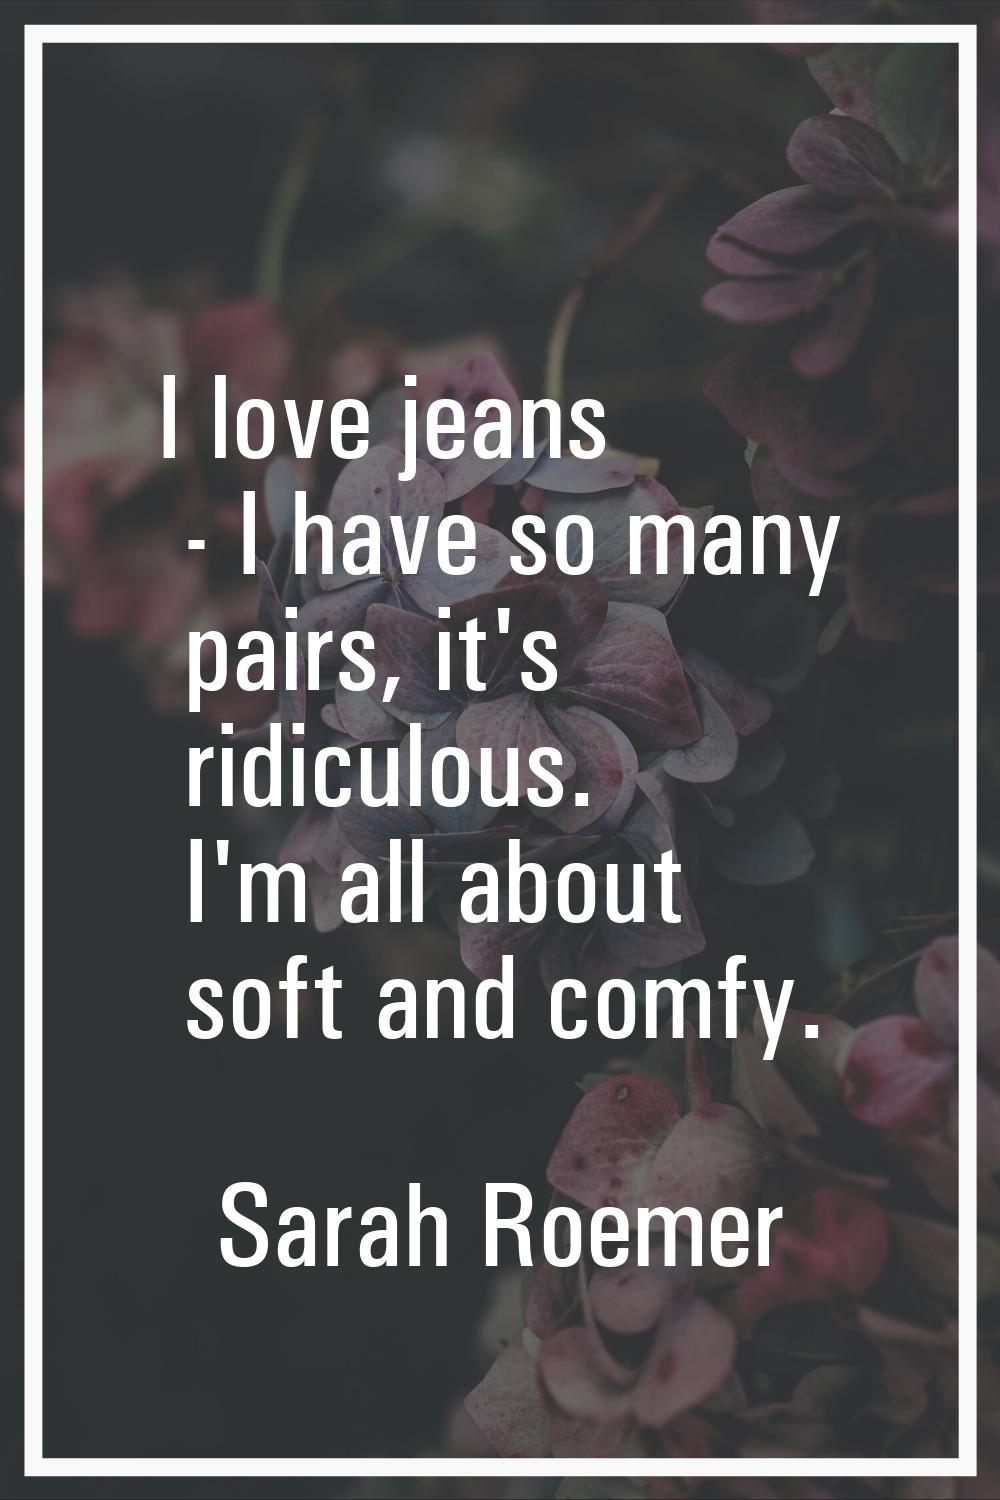 I love jeans - I have so many pairs, it's ridiculous. I'm all about soft and comfy.